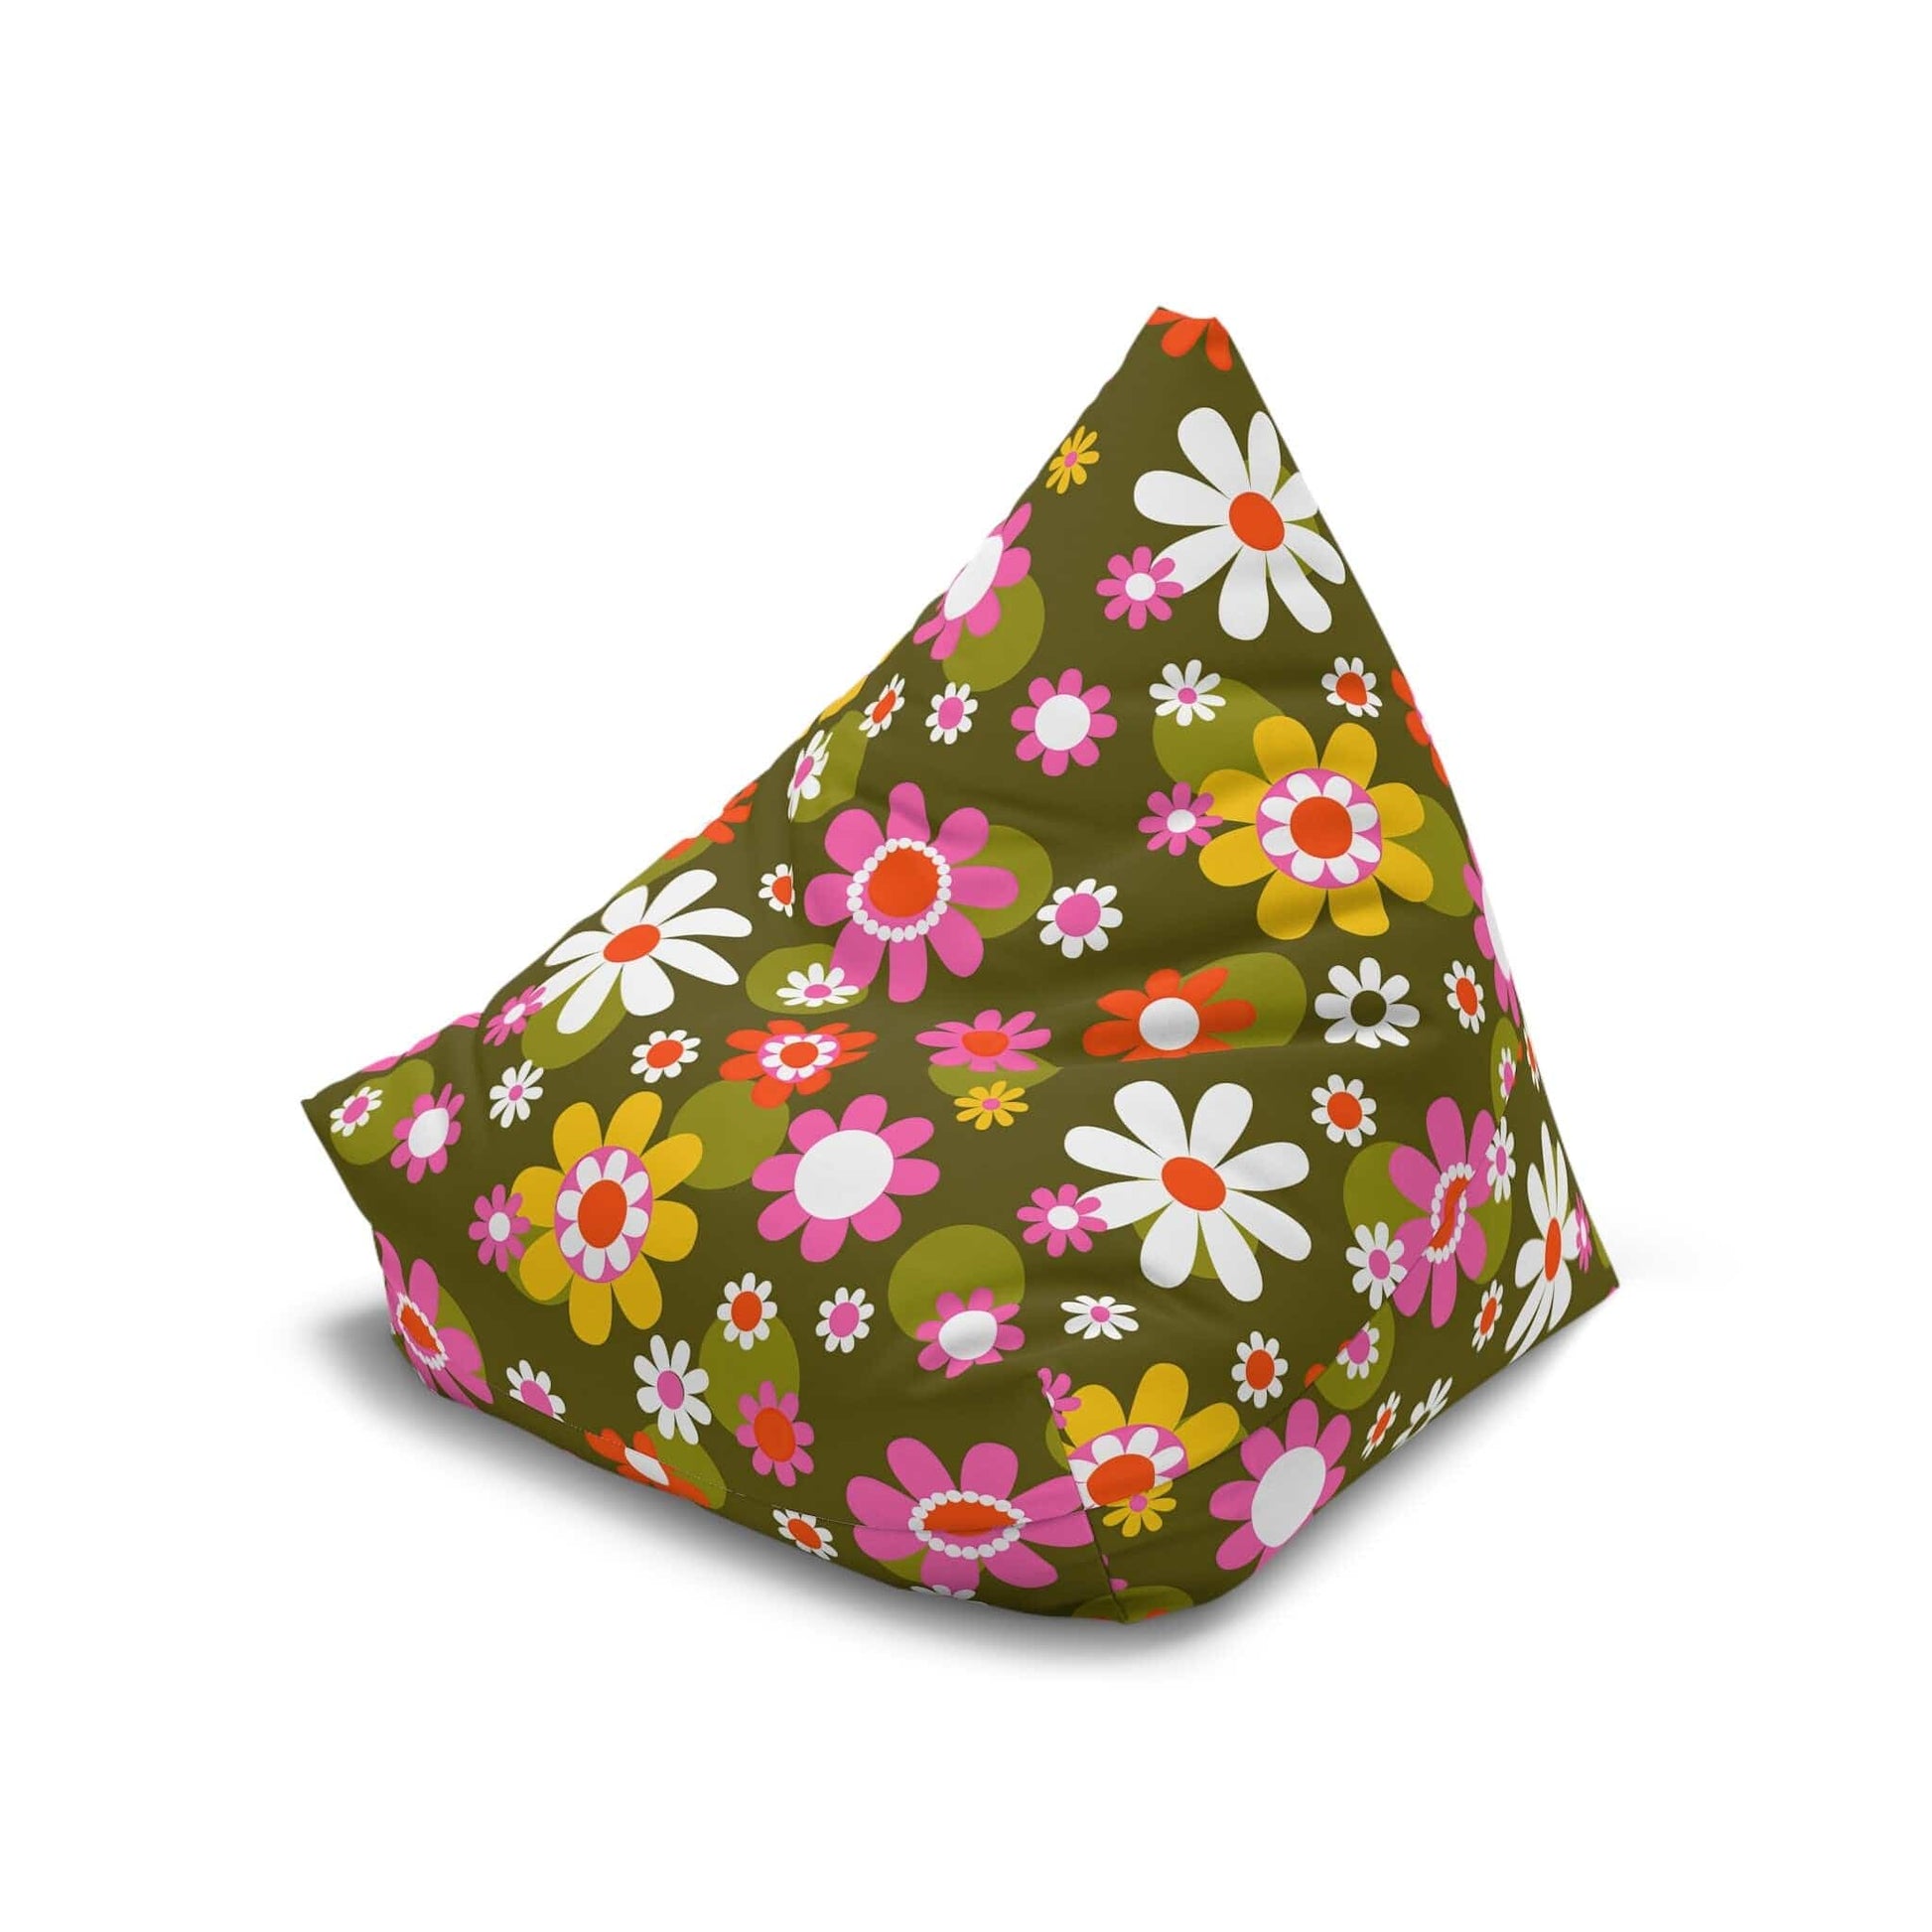 Kate McEnroe New York Retro Groovy Hippie Daisy Flower Power Bean Bag Chair Cover for Adult and Teens, Mid Century Dining Lounge Chair, 70s MCM Living Room Decor Bean Bag Chair Covers